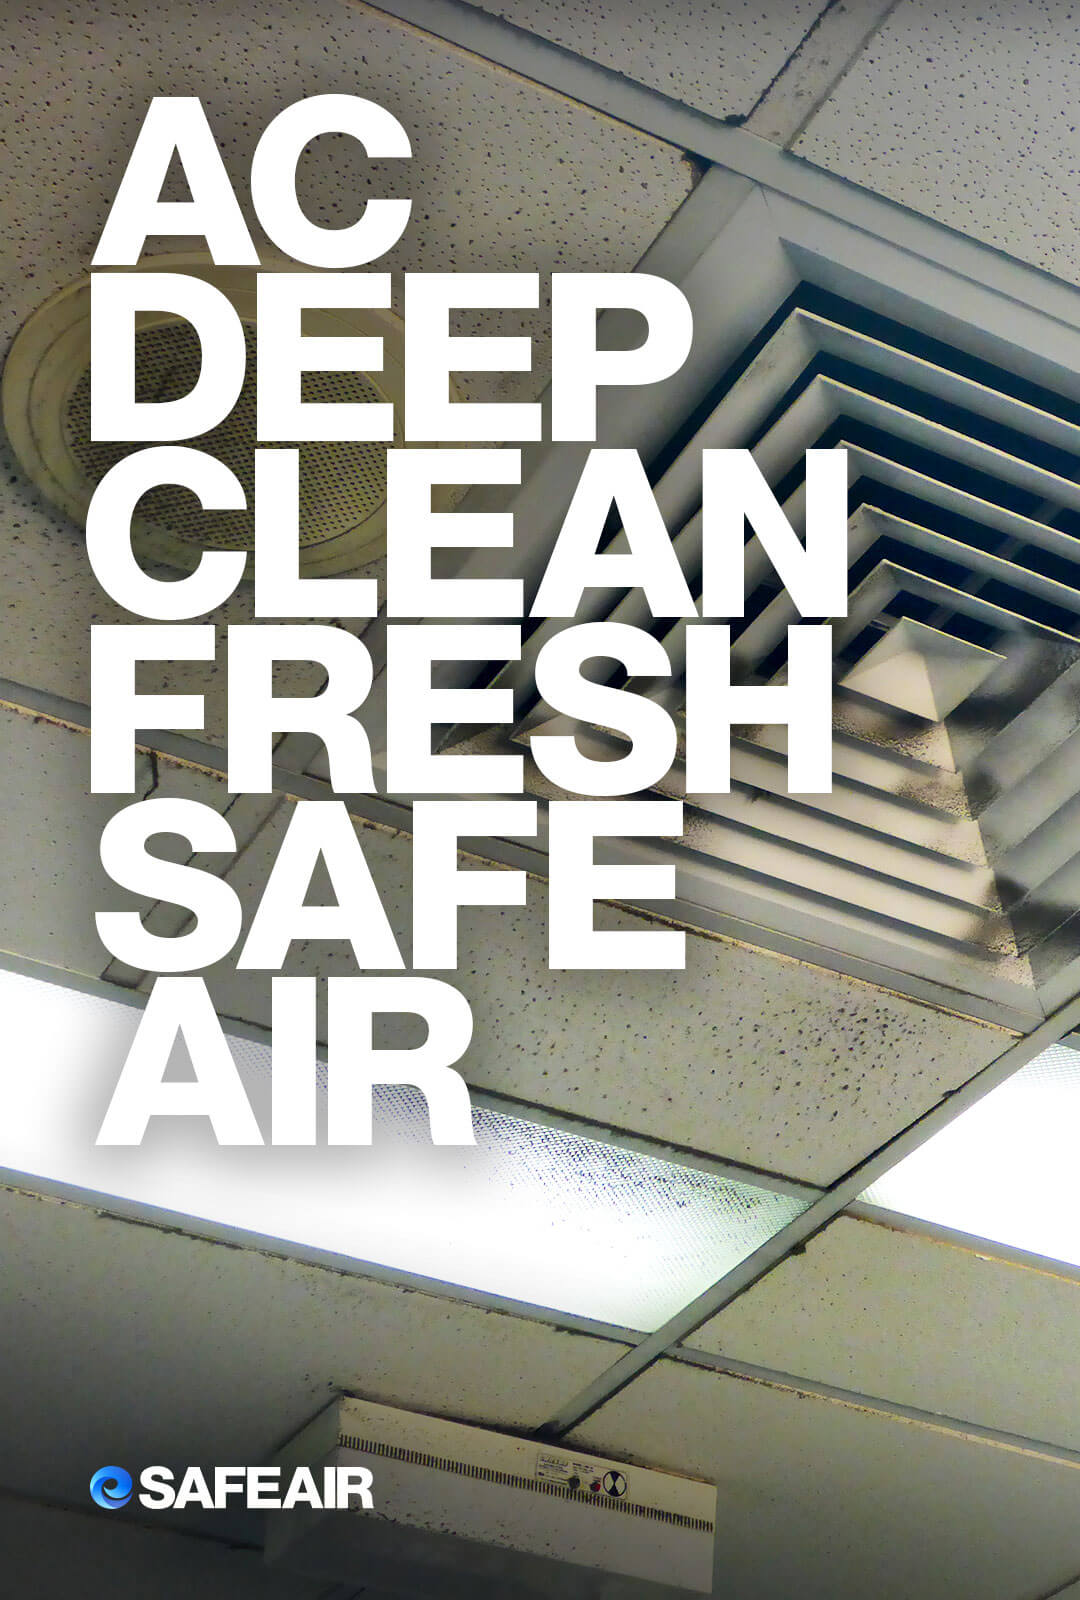 AC Air Conditioning Duct Cleaning Services